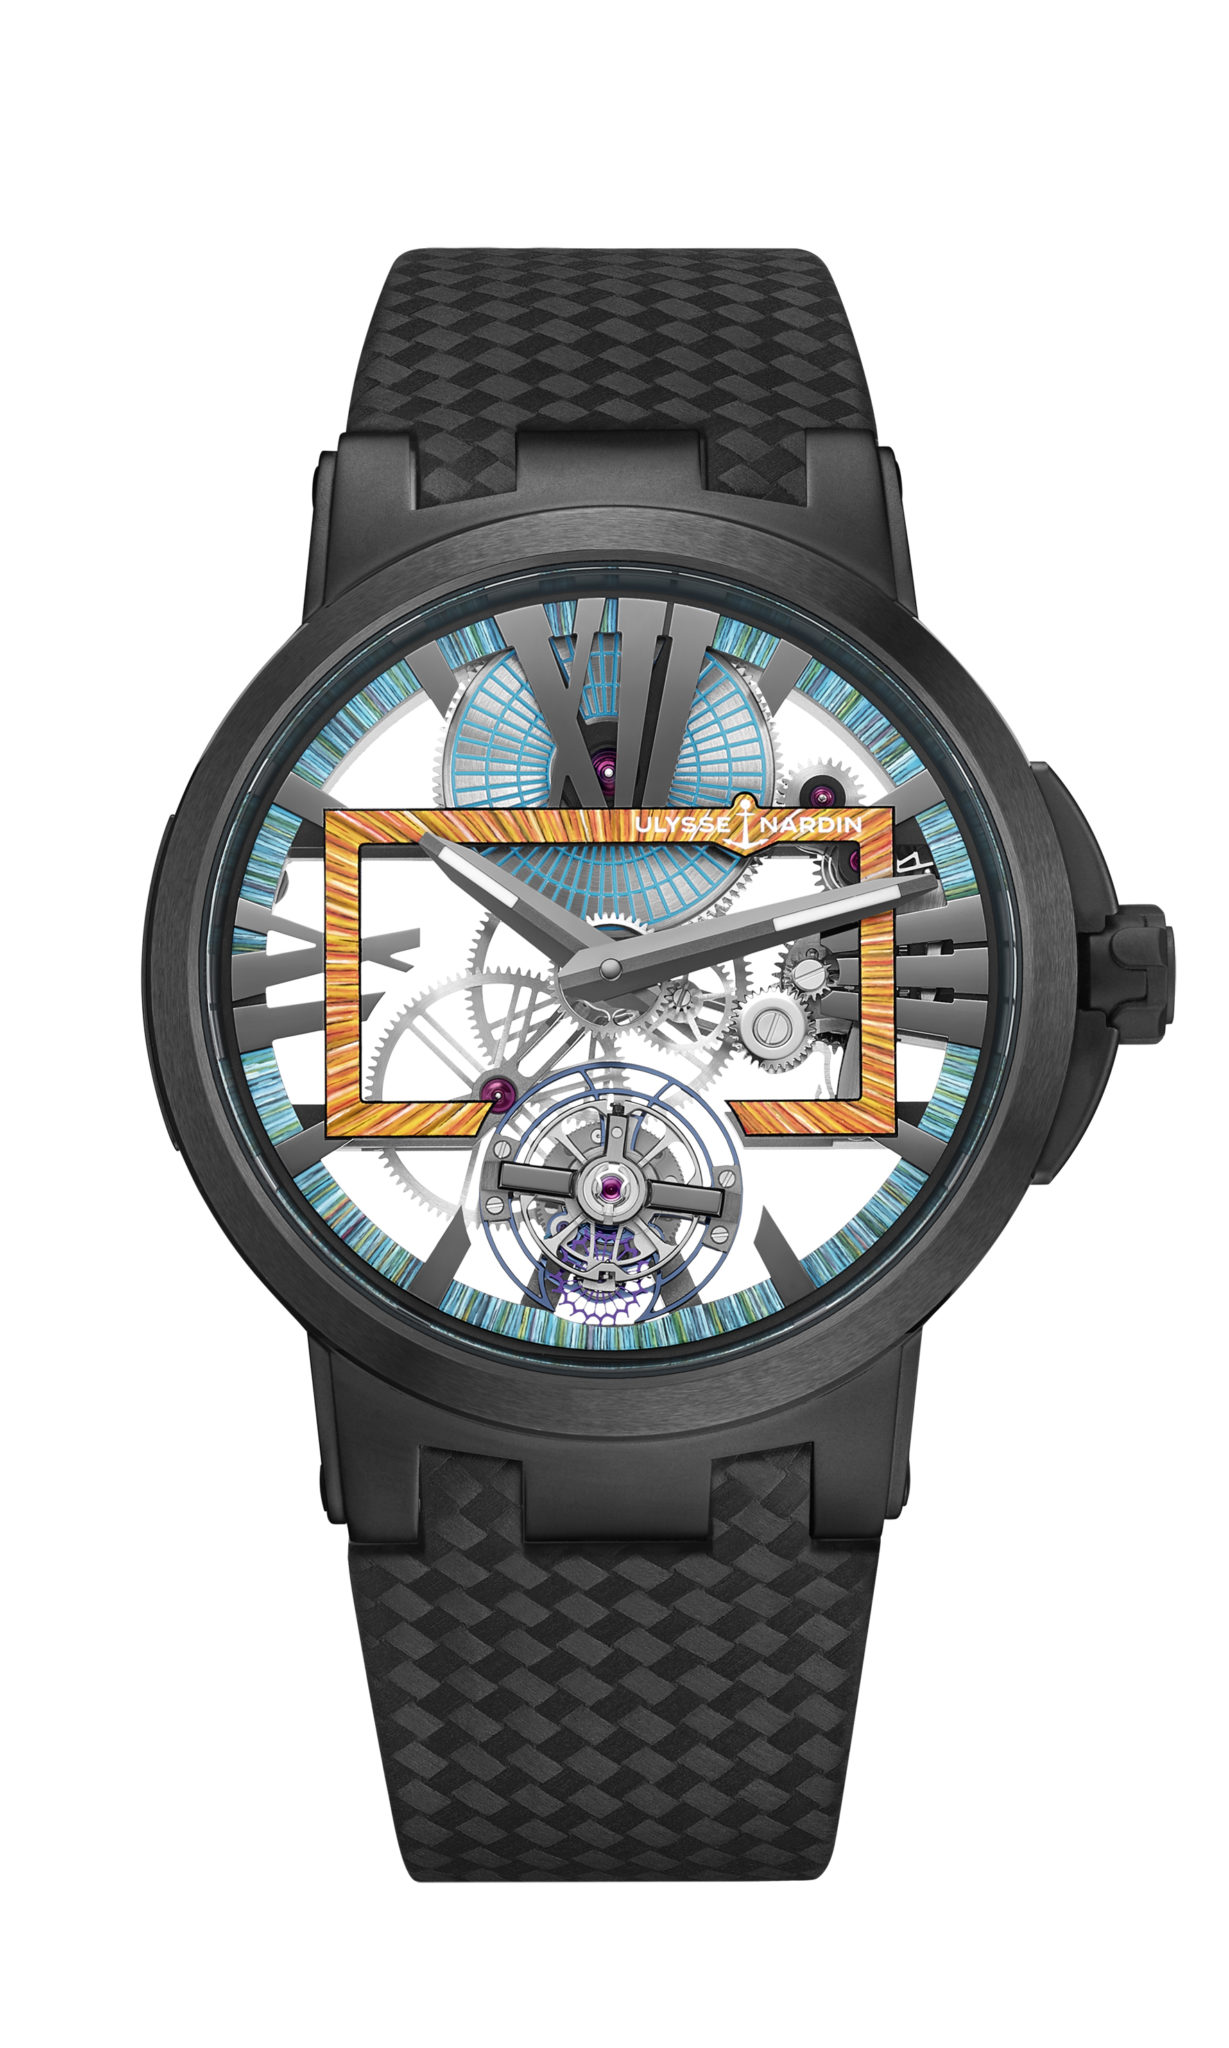 Executive skeleton 1713 139le hyperspace. 3 light